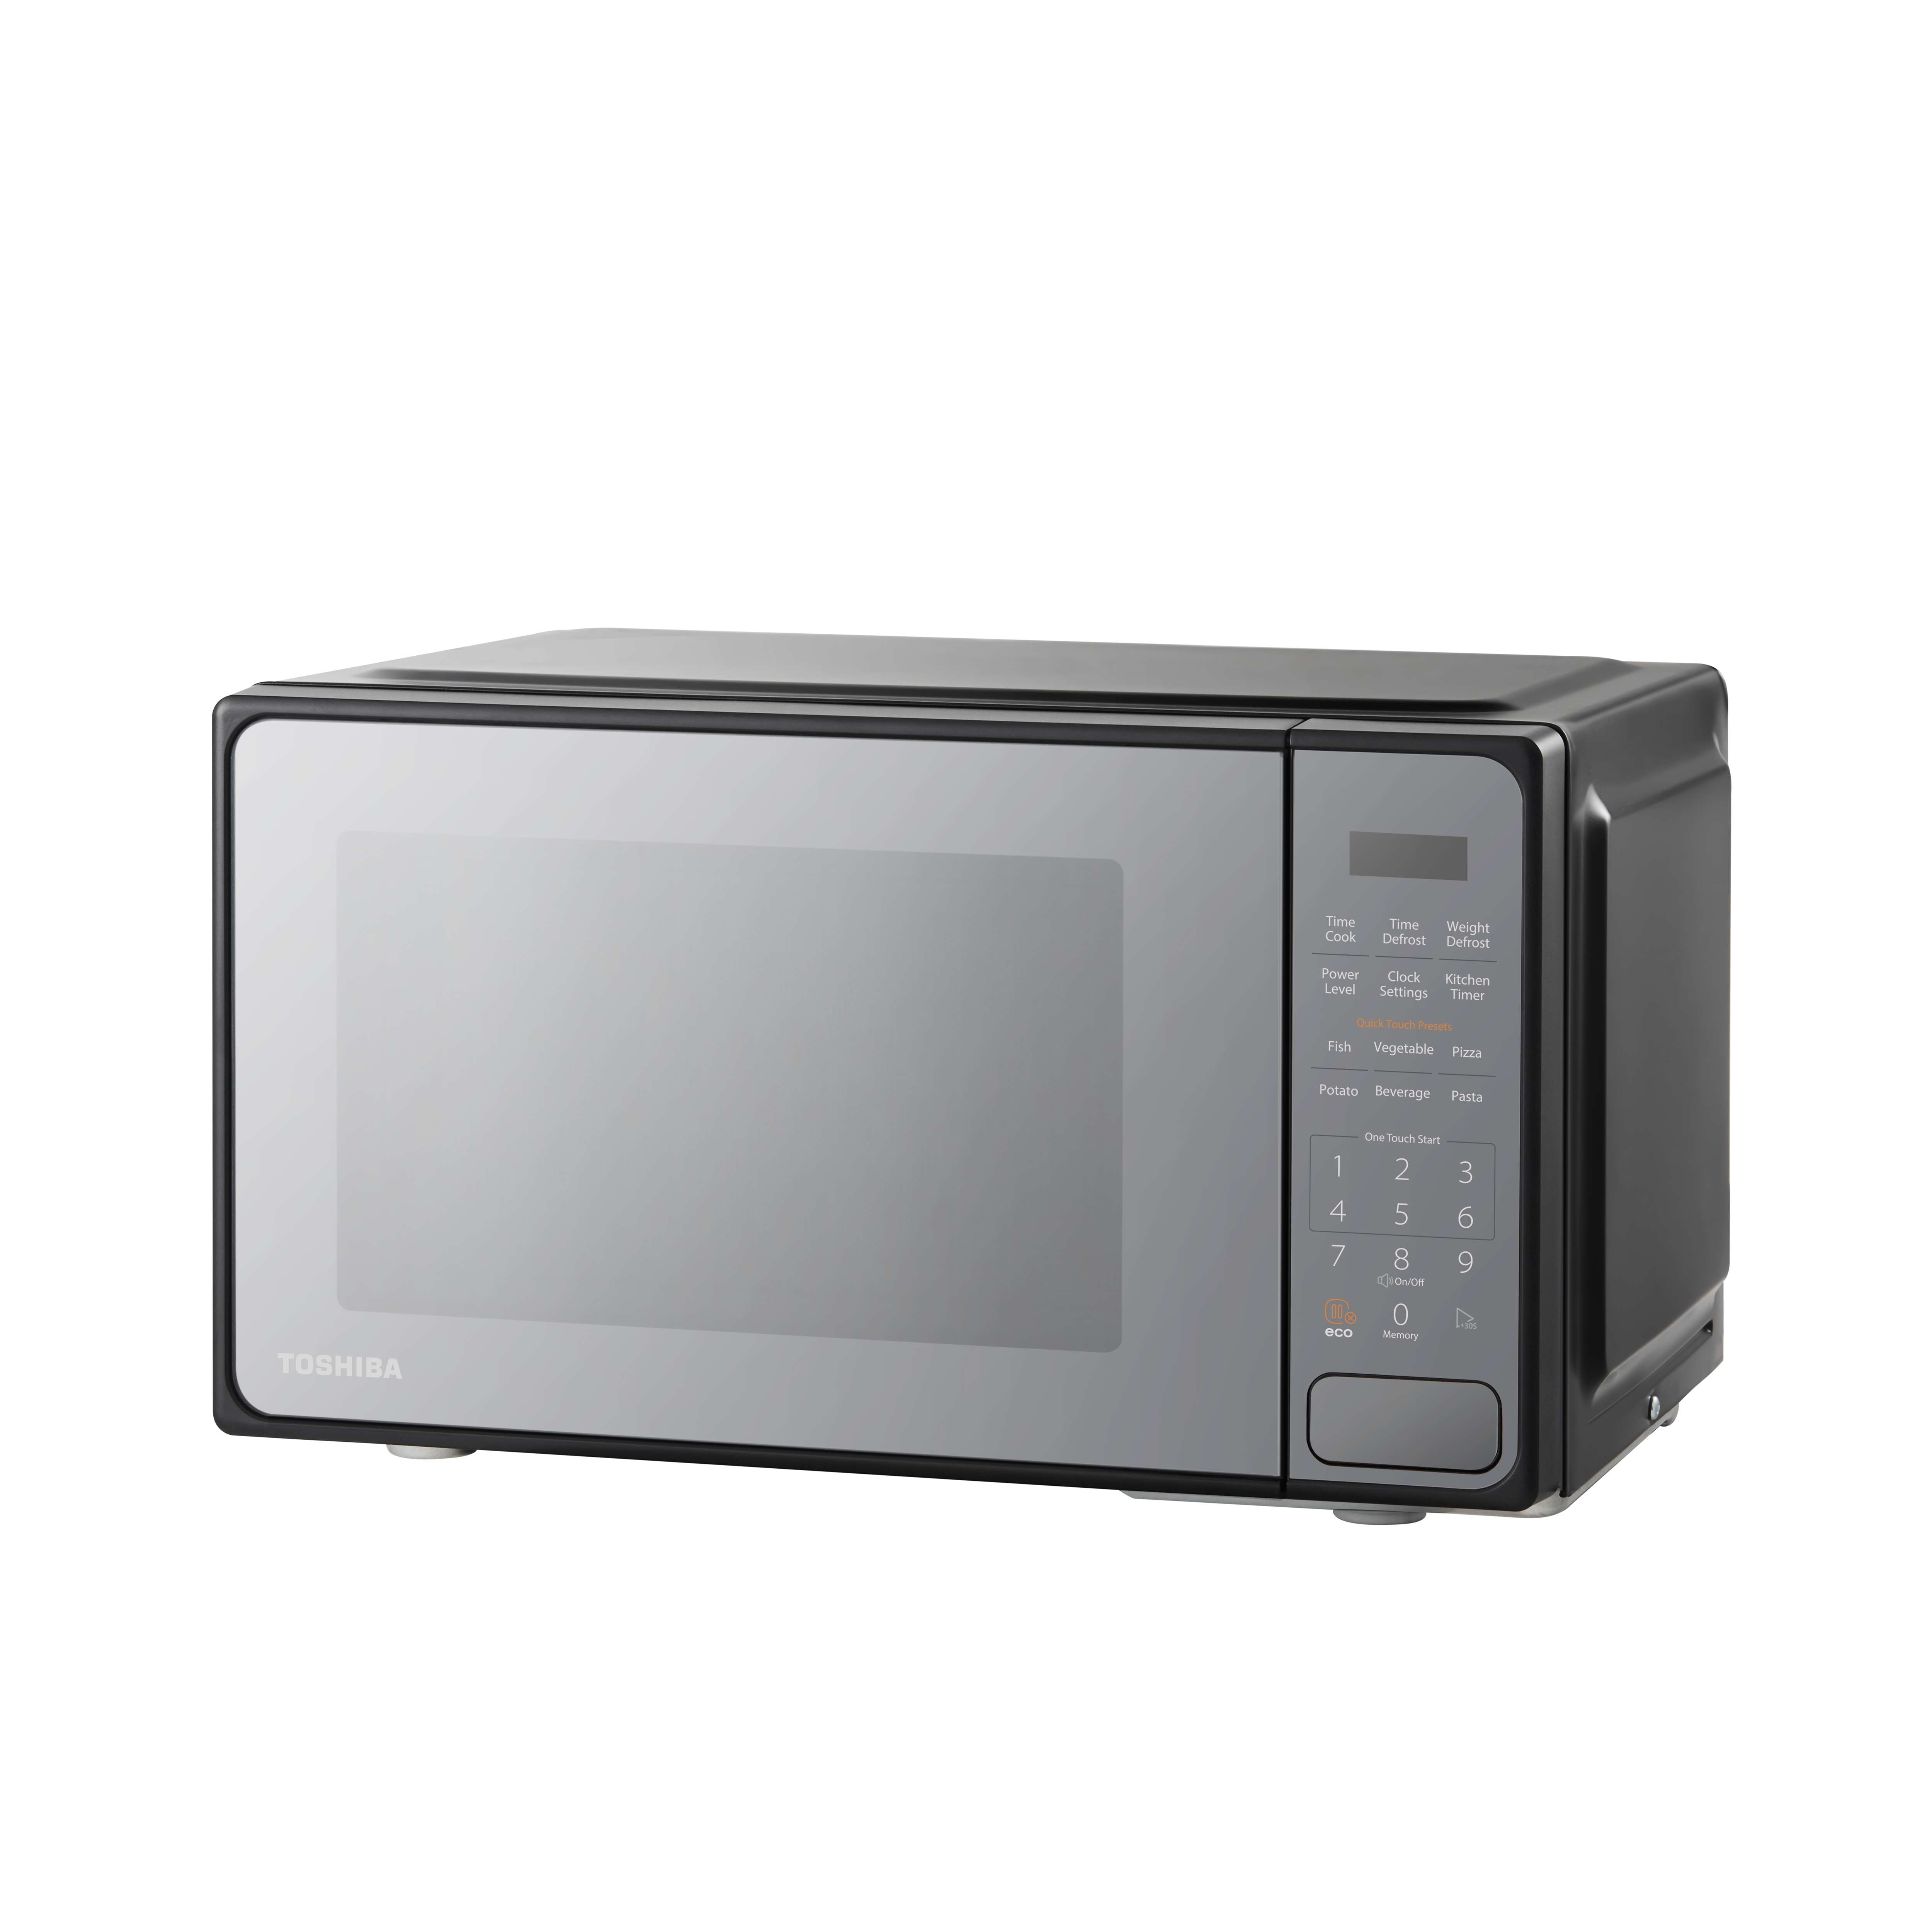 20L SOLO MICROWAVE OVEN